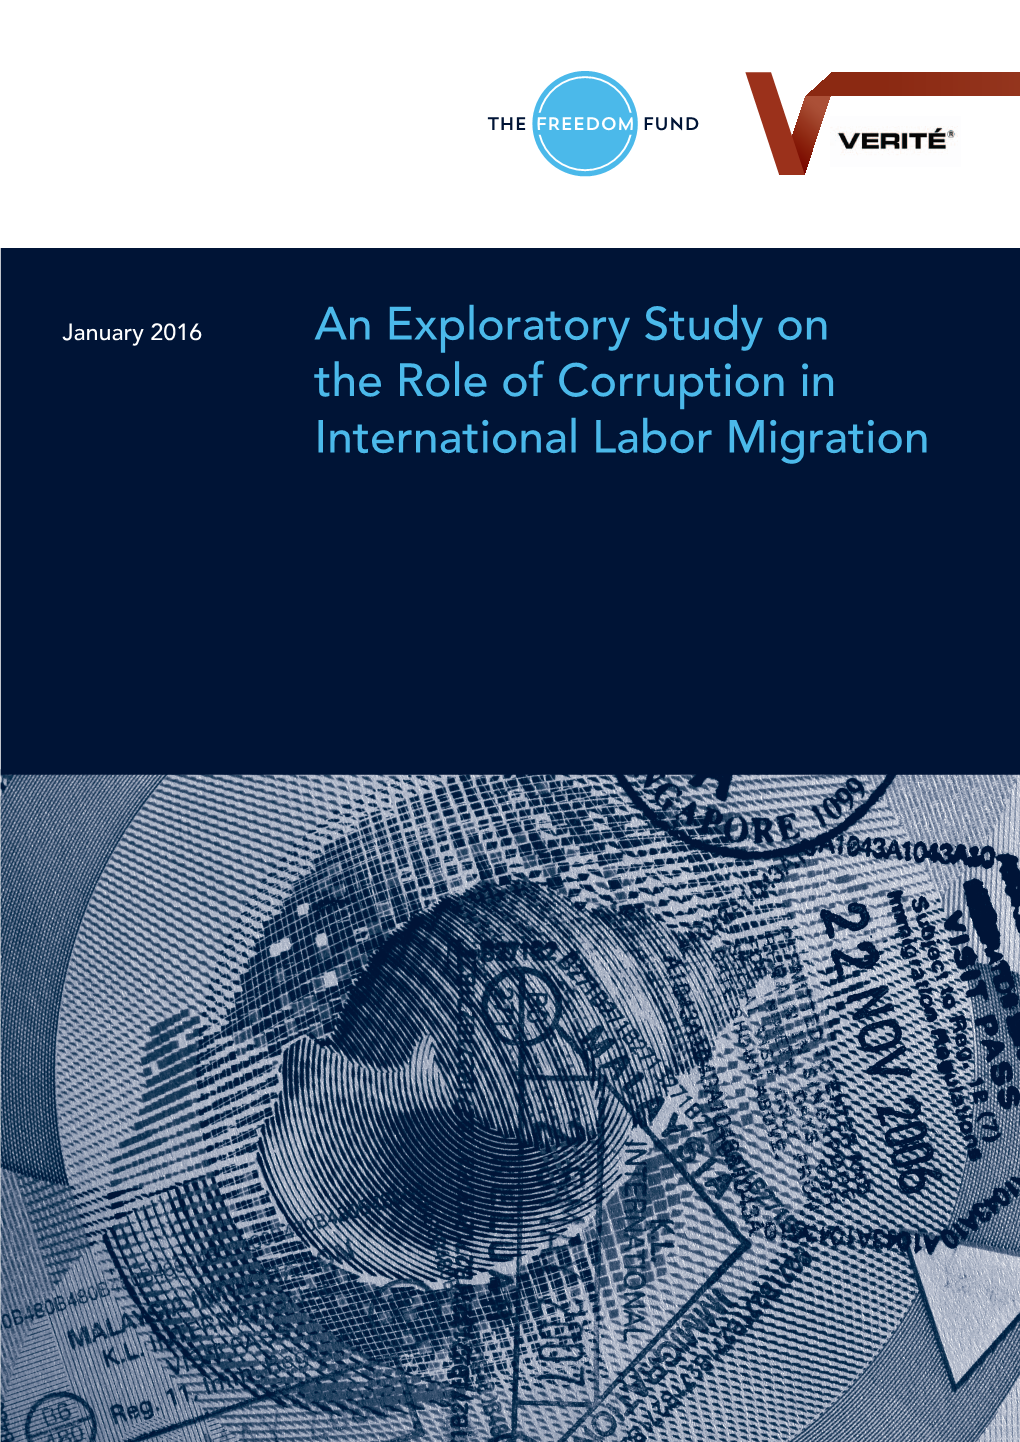 An Exploratory Study on the Role of Corruption in International Labor Migration